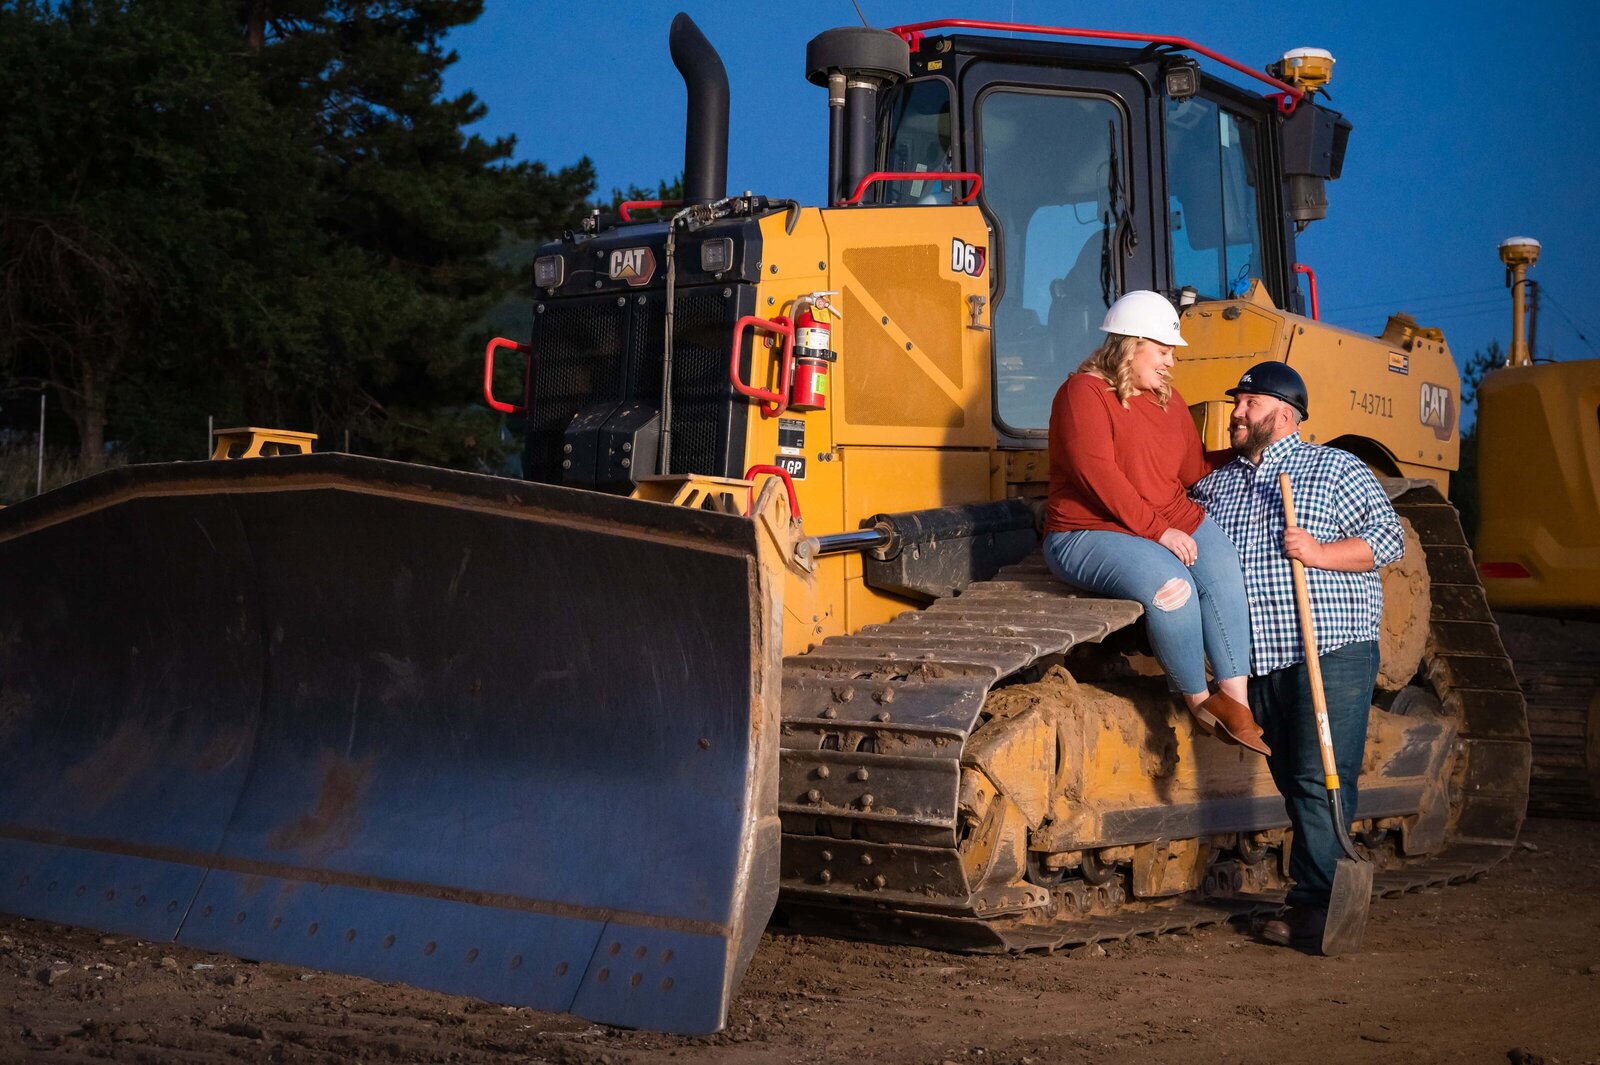 Couple with large front loader construction vehicle during engagement session.